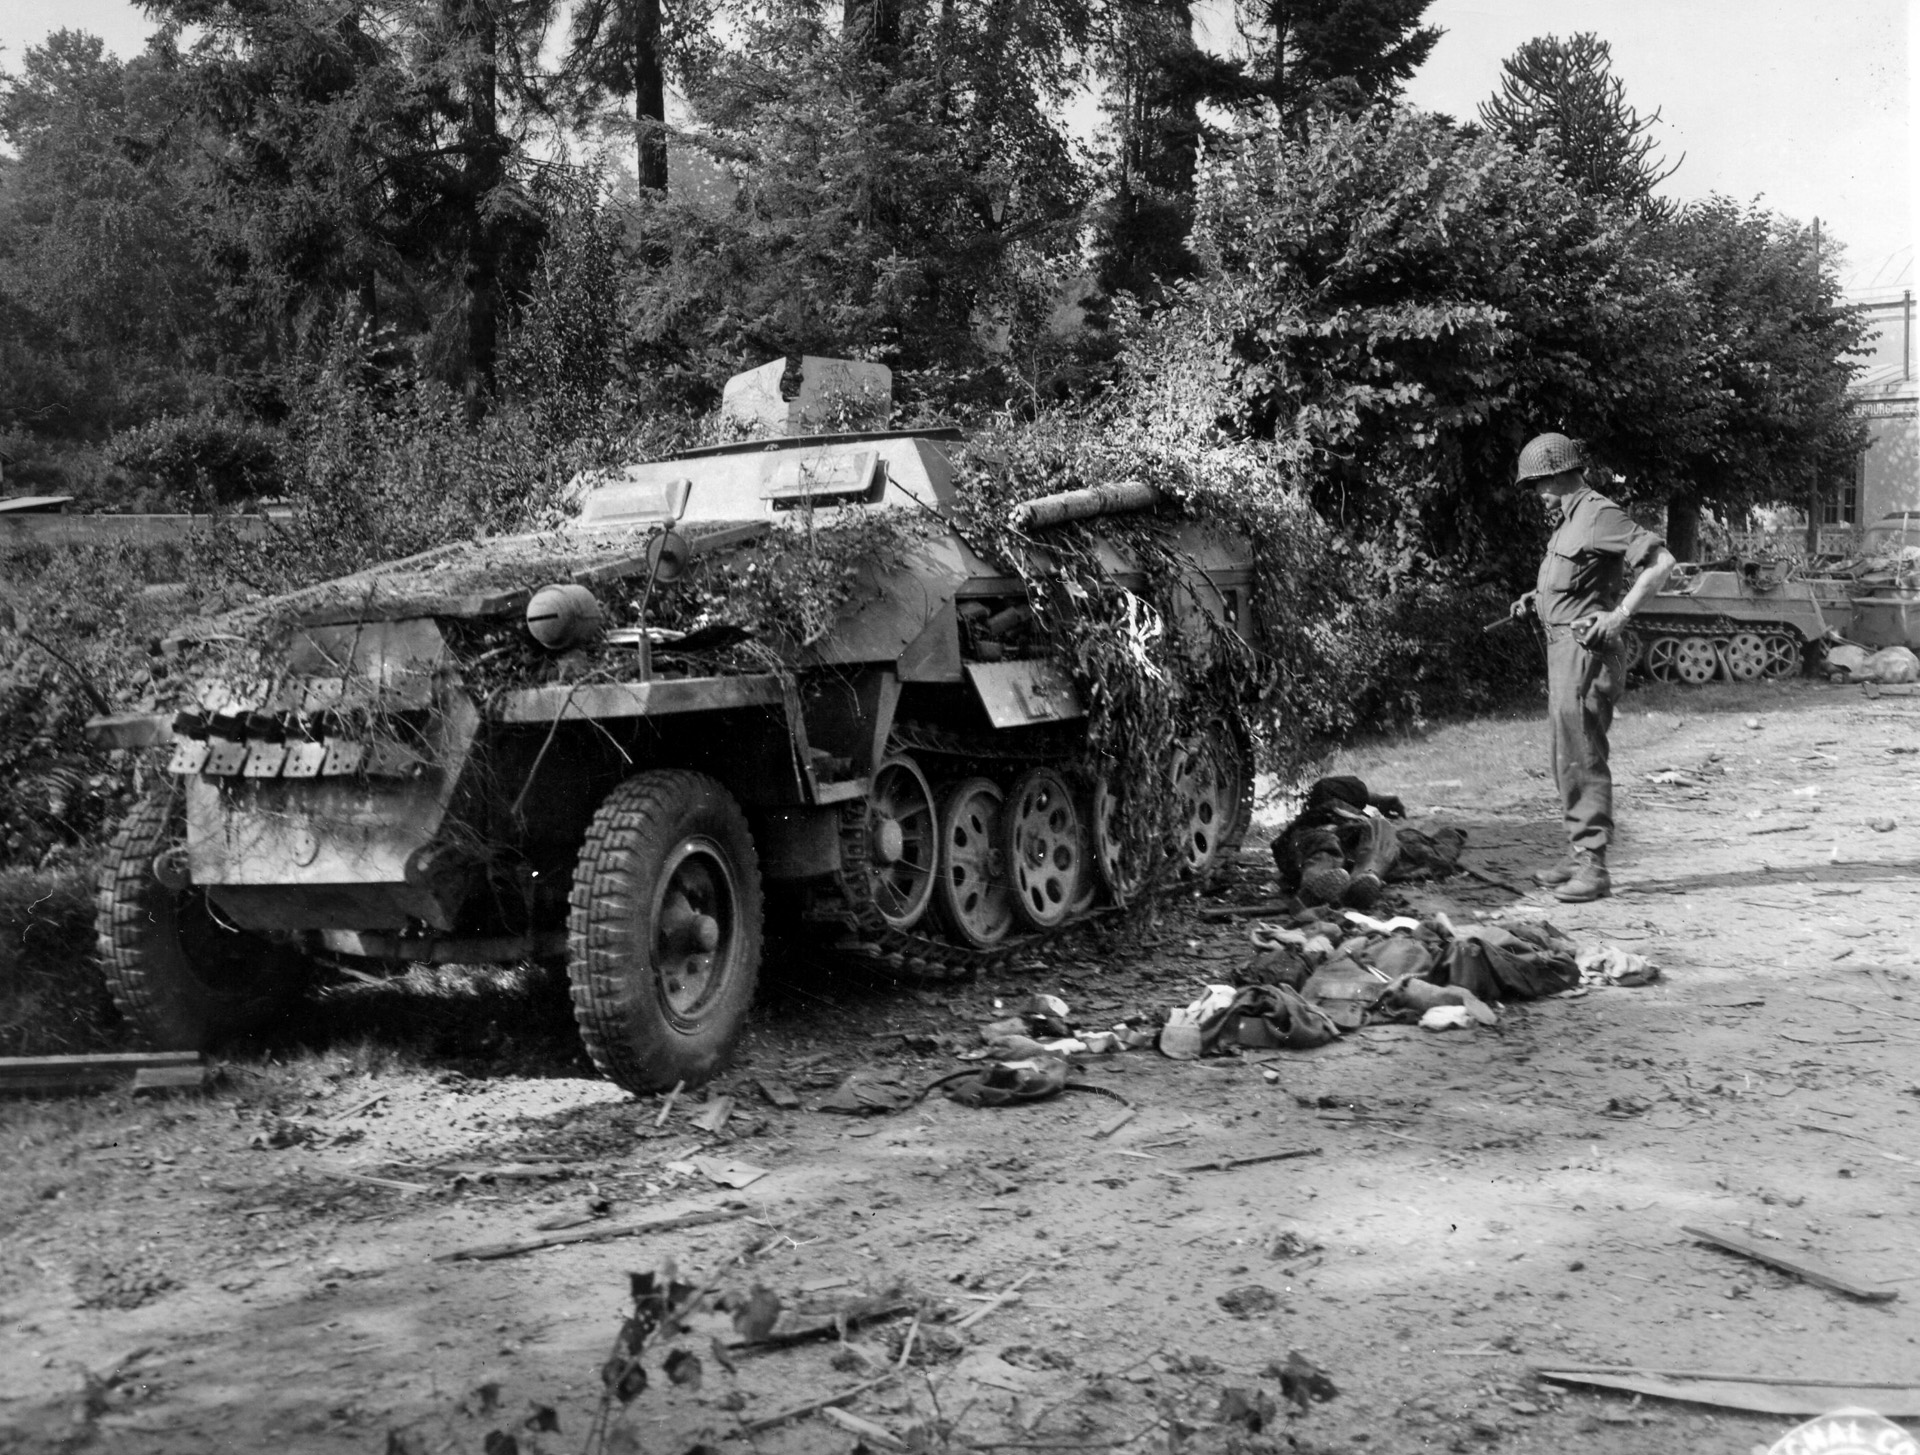 An American officer examines dead enemy soldiers lying beside a German halftrack destroyed during the attack on Mortain. Although American casualties were high, the Germans suffered even more.